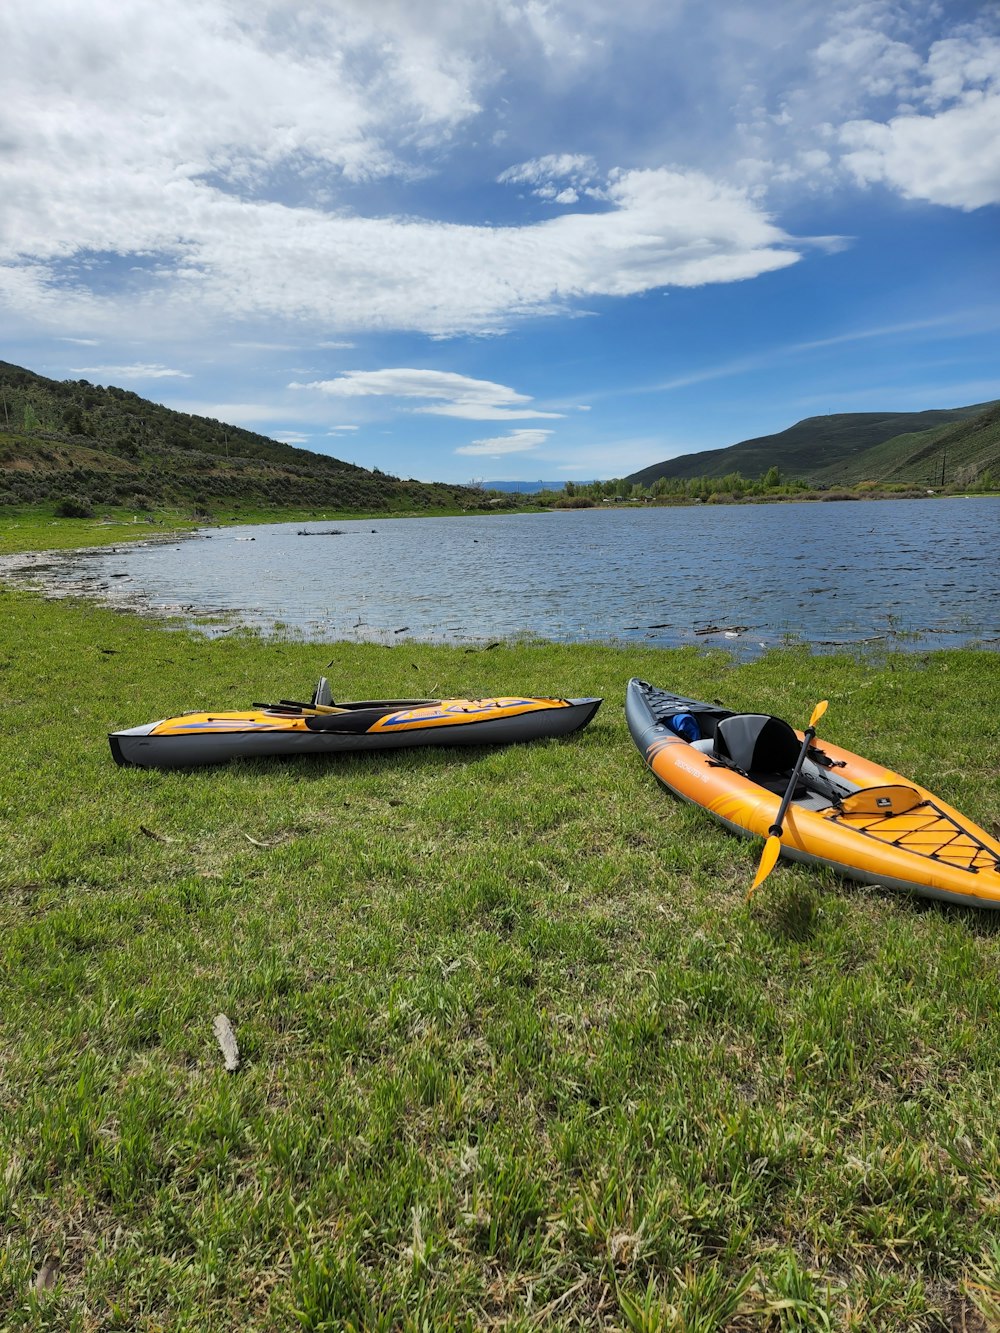 a couple of kayaks on grass by a body of water